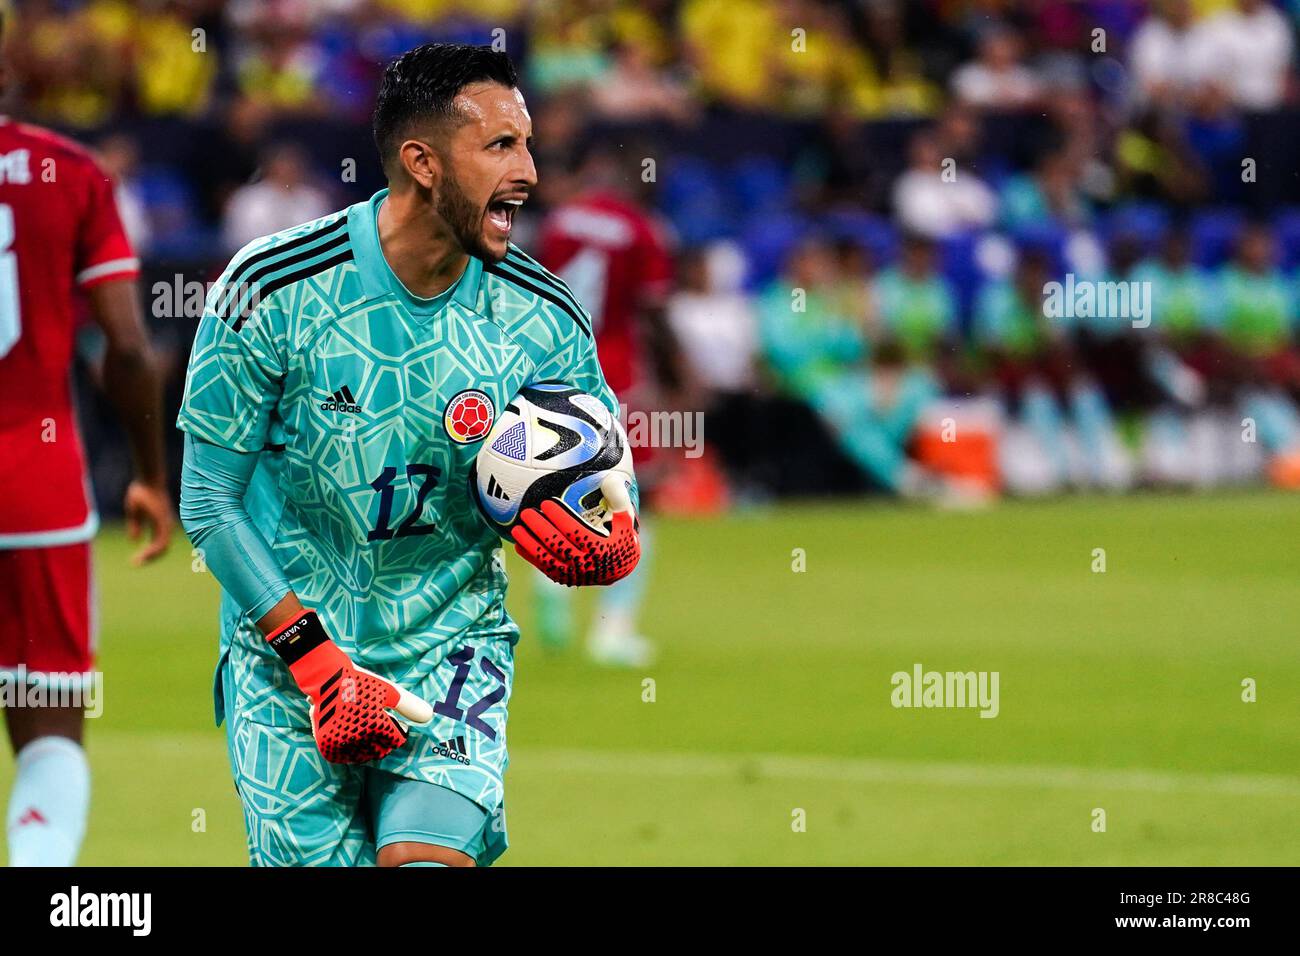 Gelsenkirchen, Germany. 20th June, 2023. GELSENKIRCHEN, GERMANY - JUNE 20: Goalkeeper Camilo Vargas of Colombia shouting during the International Friendly match between Germany and Colombia at the Veltins-Arena on June 20, 2023 in Gelsenkirchen, Germany (Photo by Joris Verwijst/Orange Pictures) Credit: Orange Pics BV/Alamy Live News Stock Photo